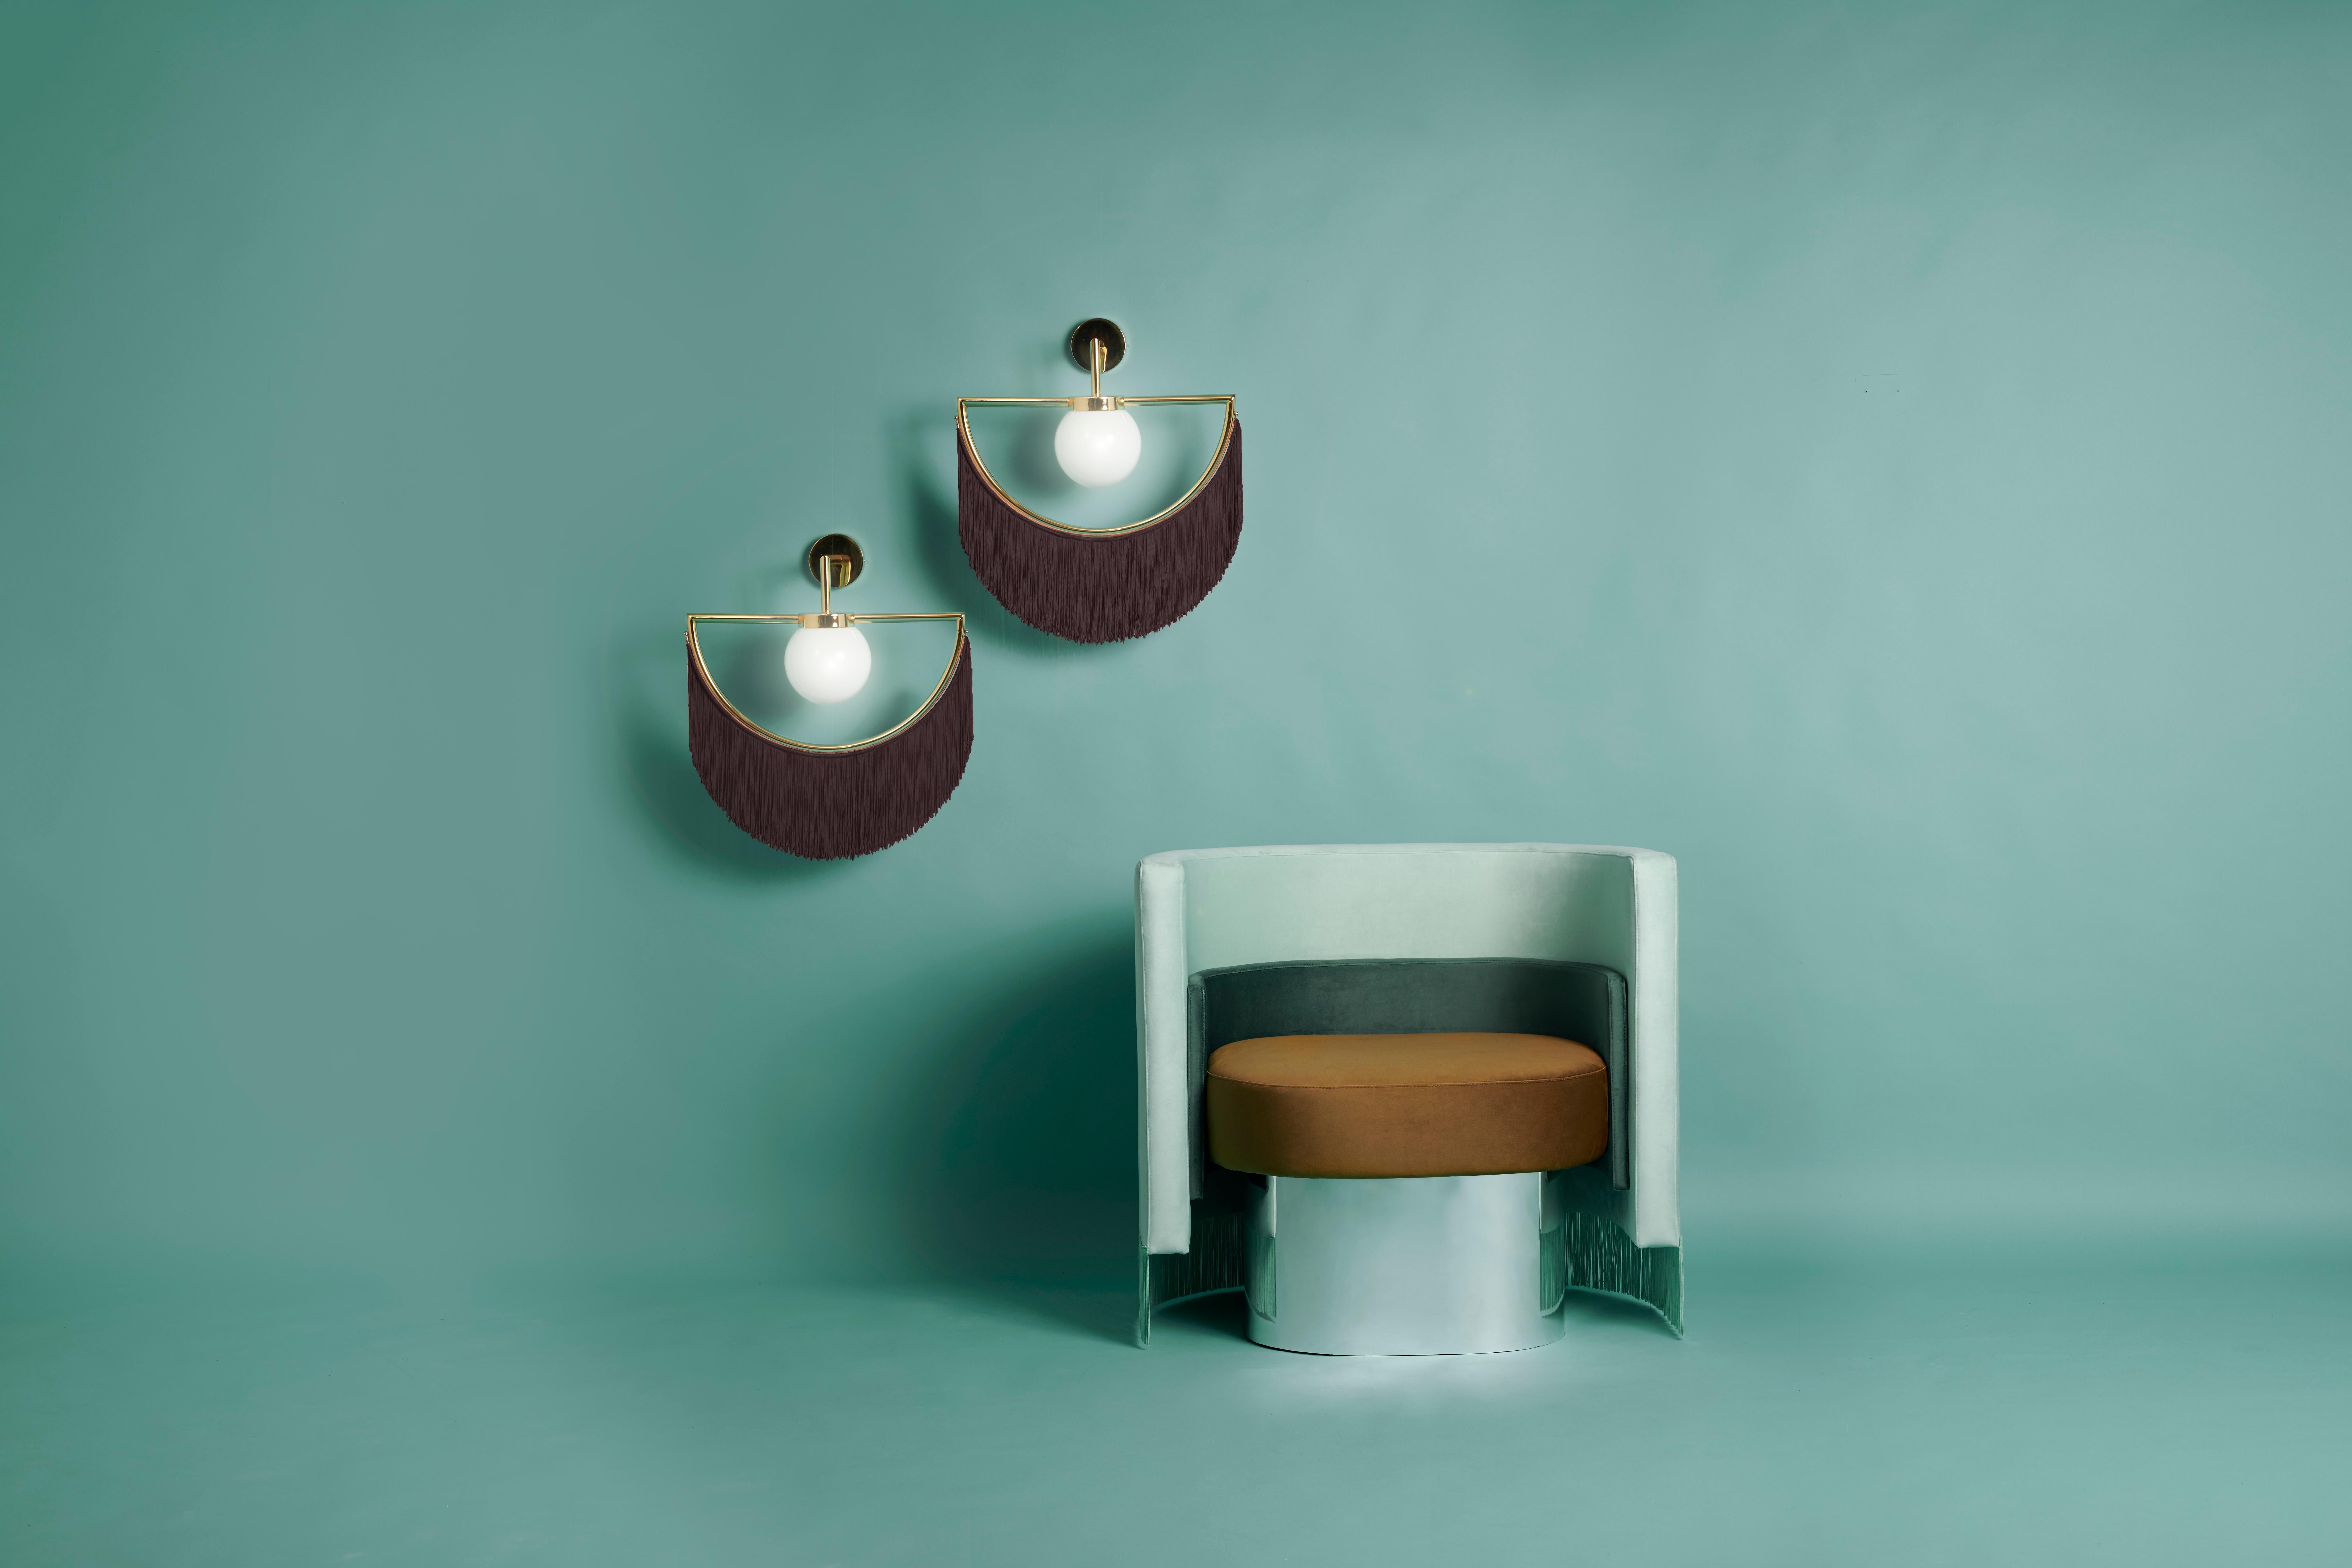 Lamps can wink their eyes, and they can also do it in the most elegant way: with fringes, gold and delicacy. 
From the collaboration of Masquespacio and Houtique appears Wink, a lamp that brings past and future vibes at
the same time.

Wall lamp